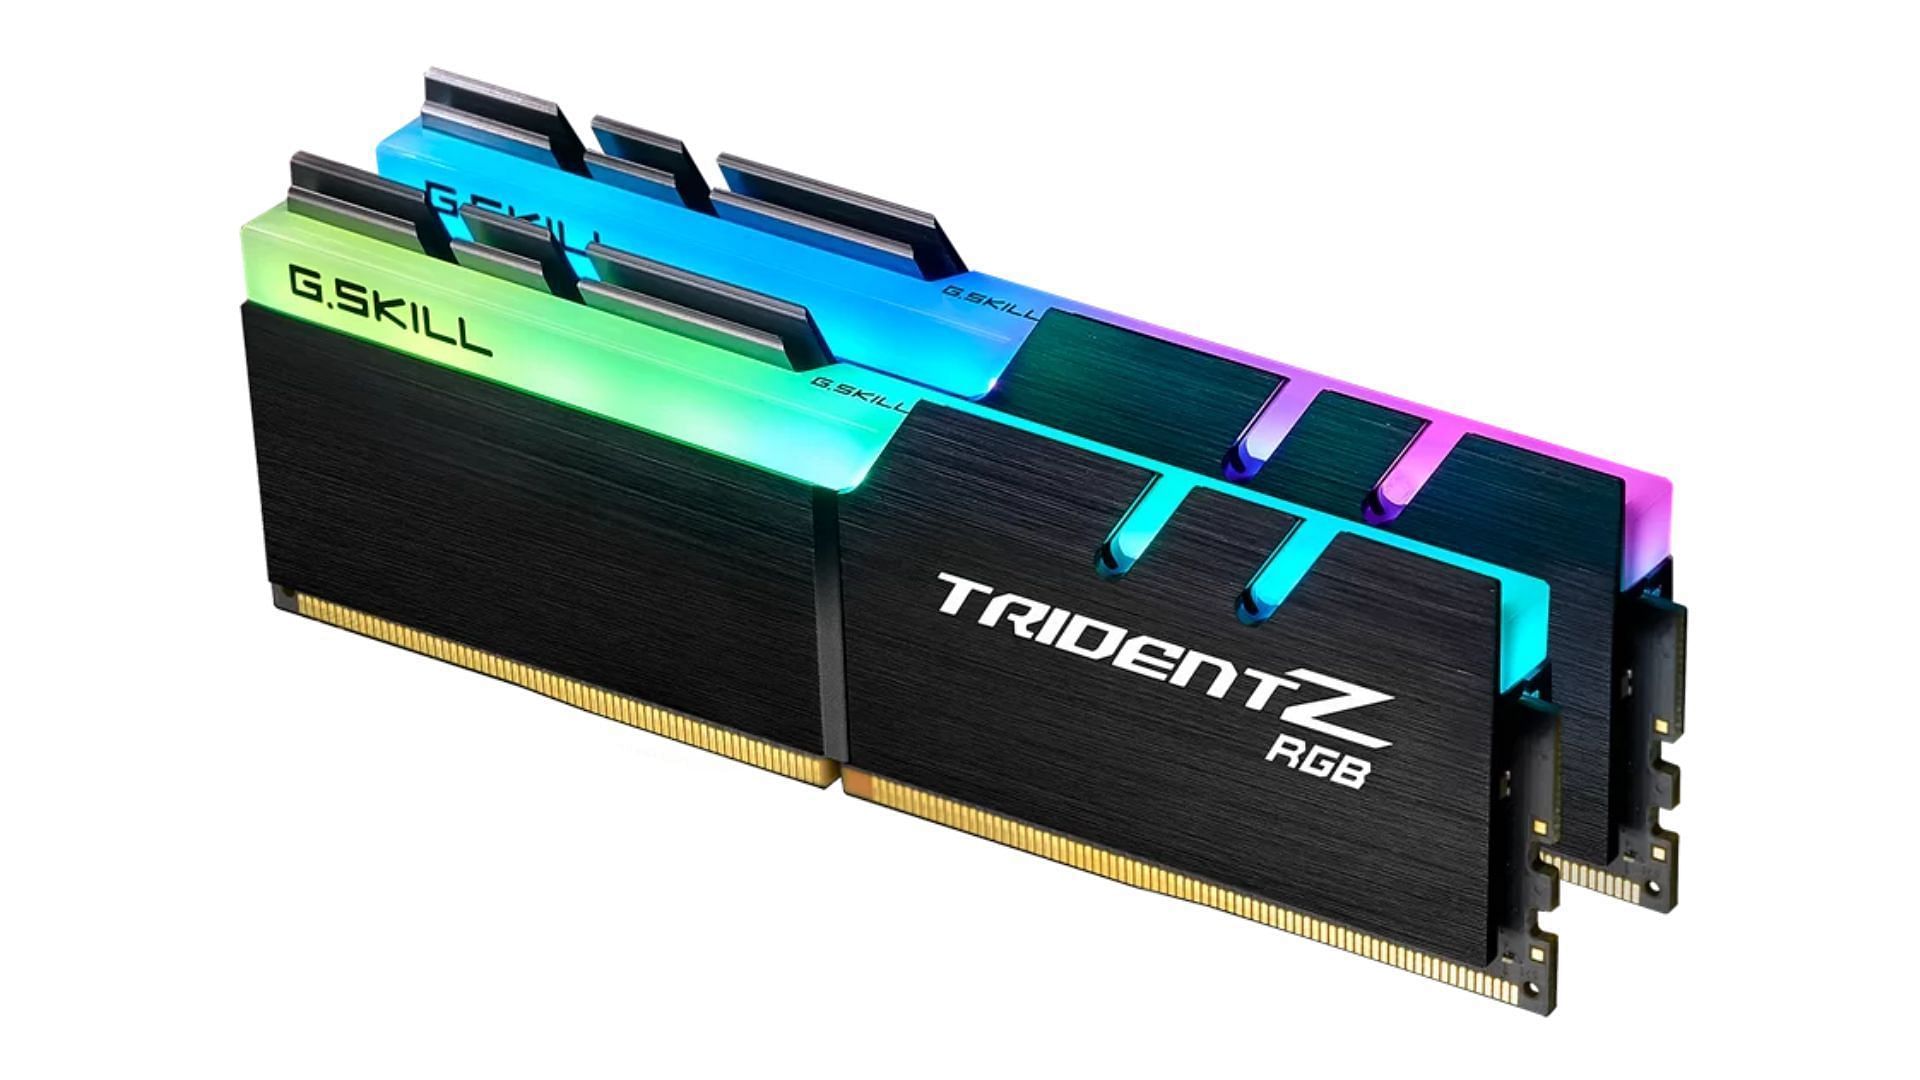 The G.SKILL TridentZ RGB Series is among the best DDR4 RAM for gaming (Image via G.SKILL)